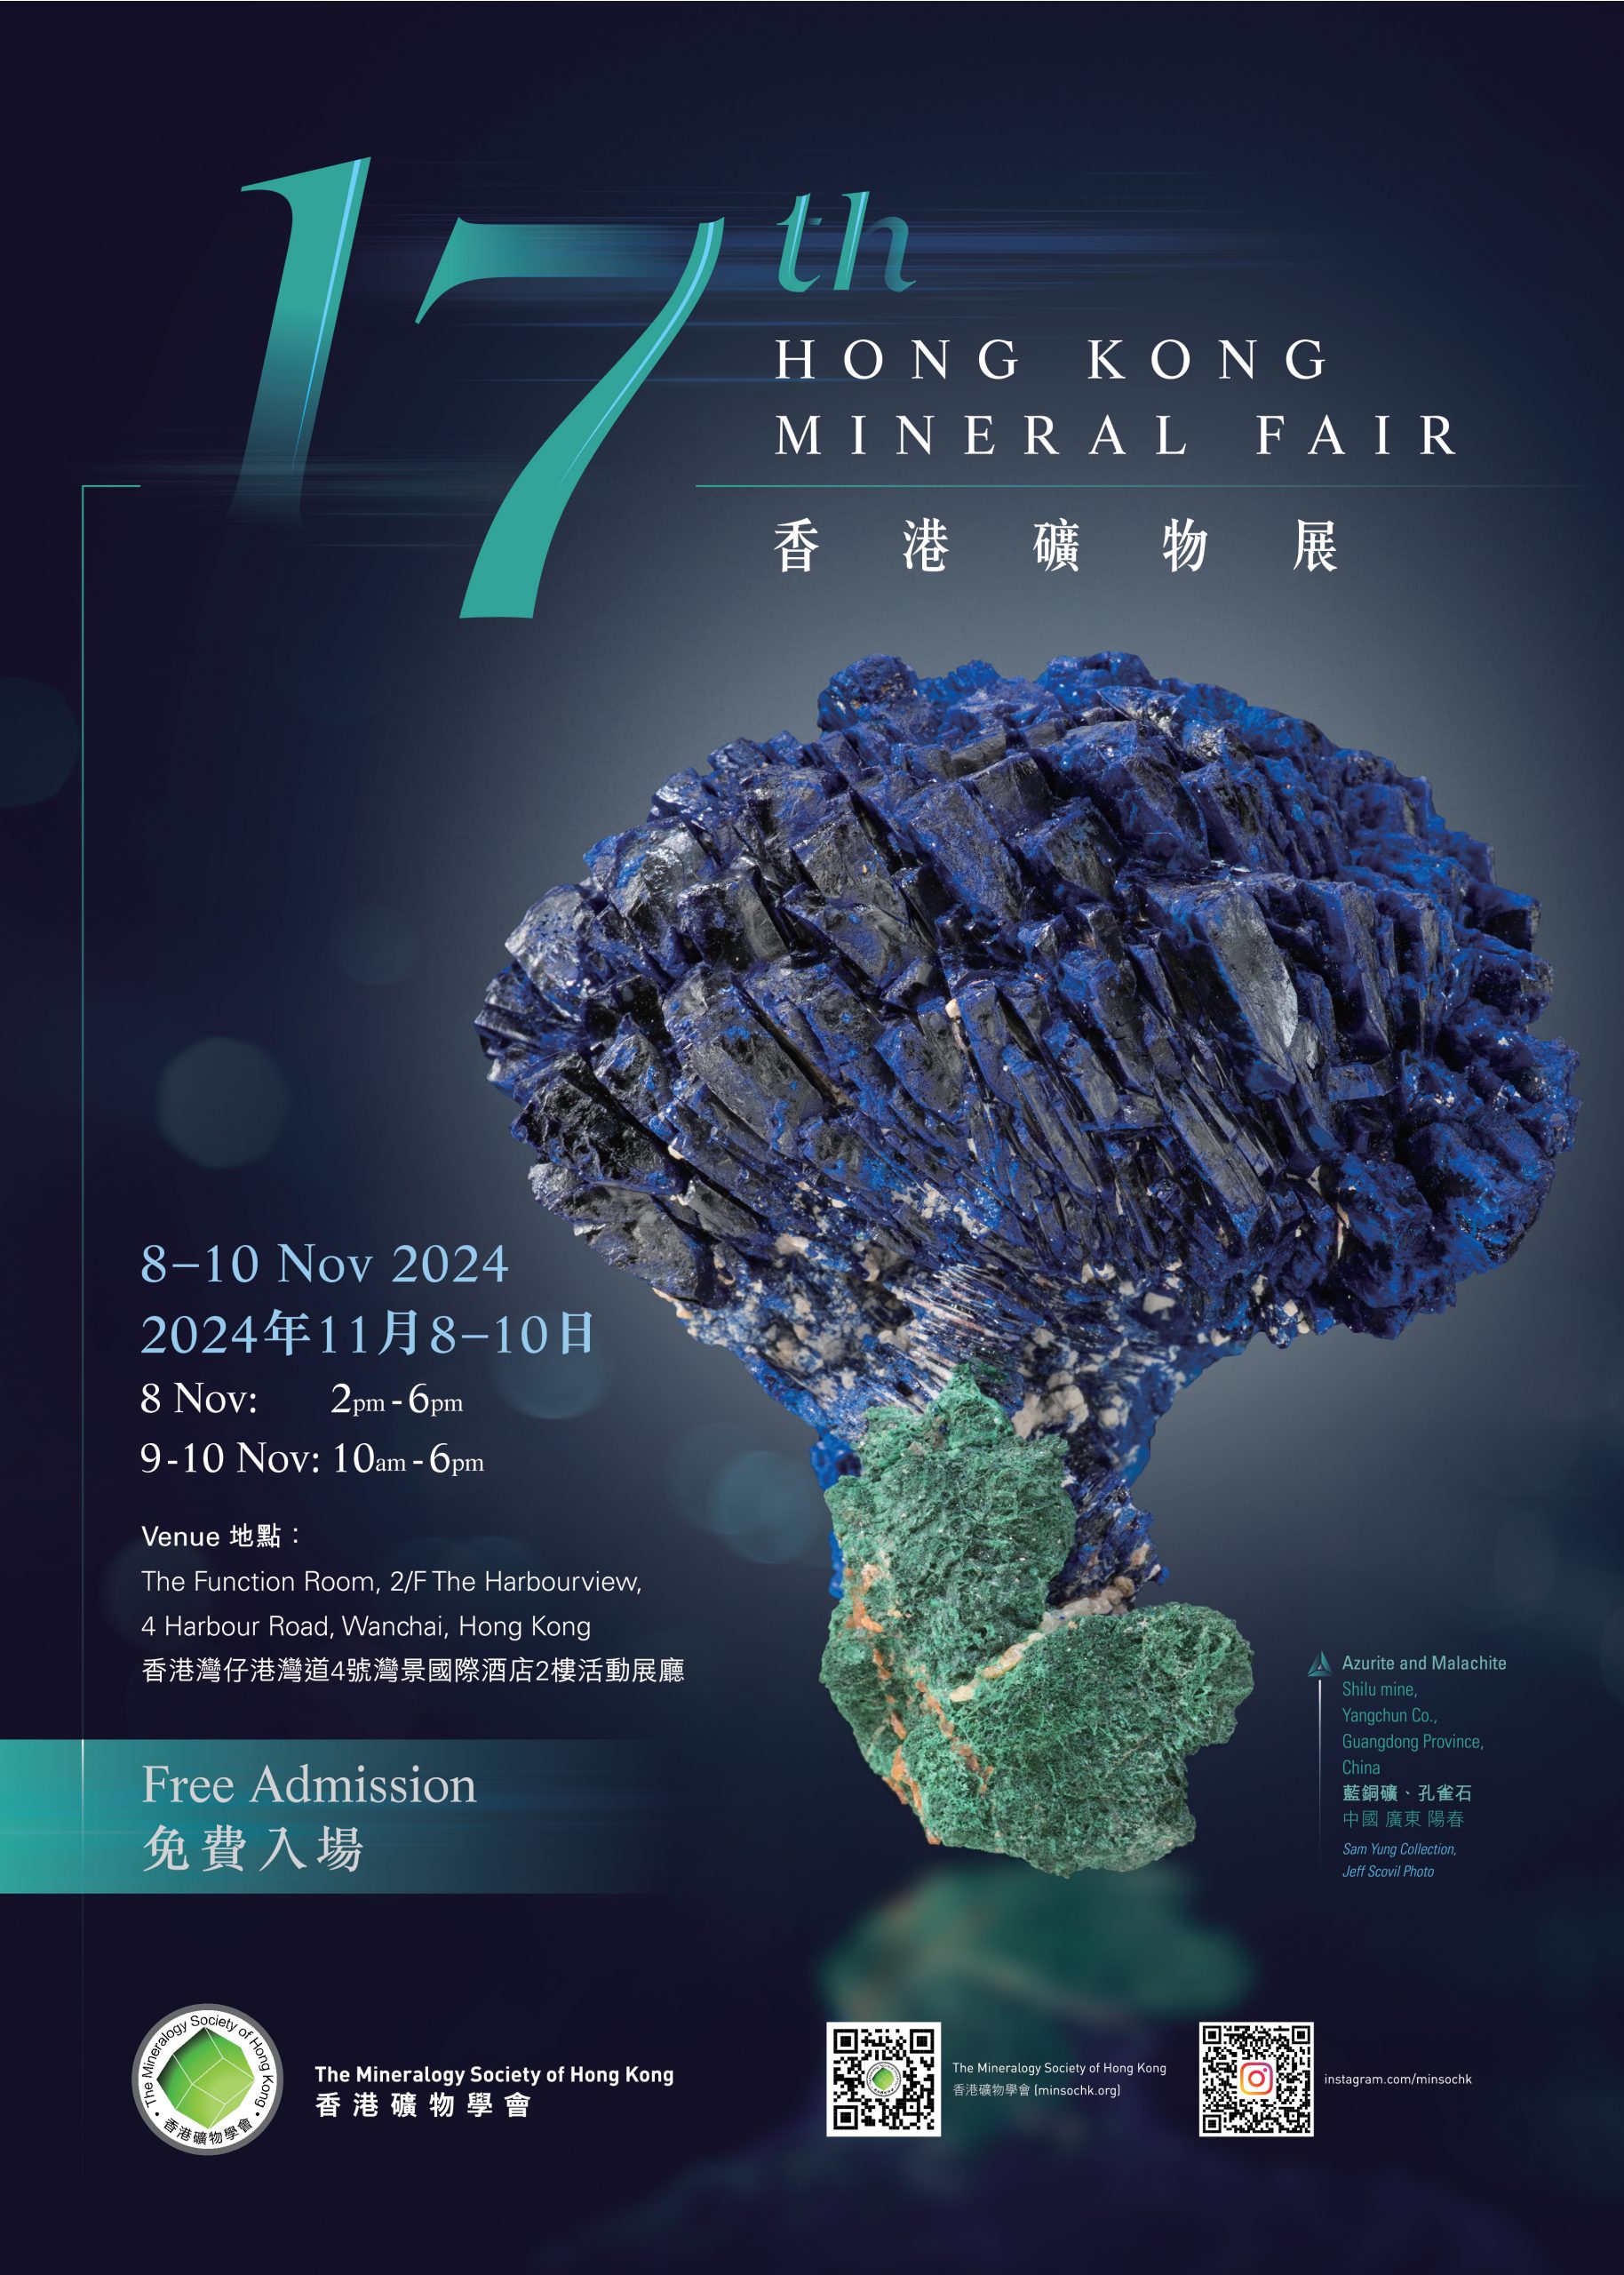 <p style="font-size:32px;color:#585858">The Mineralogy Society of Hong Kong